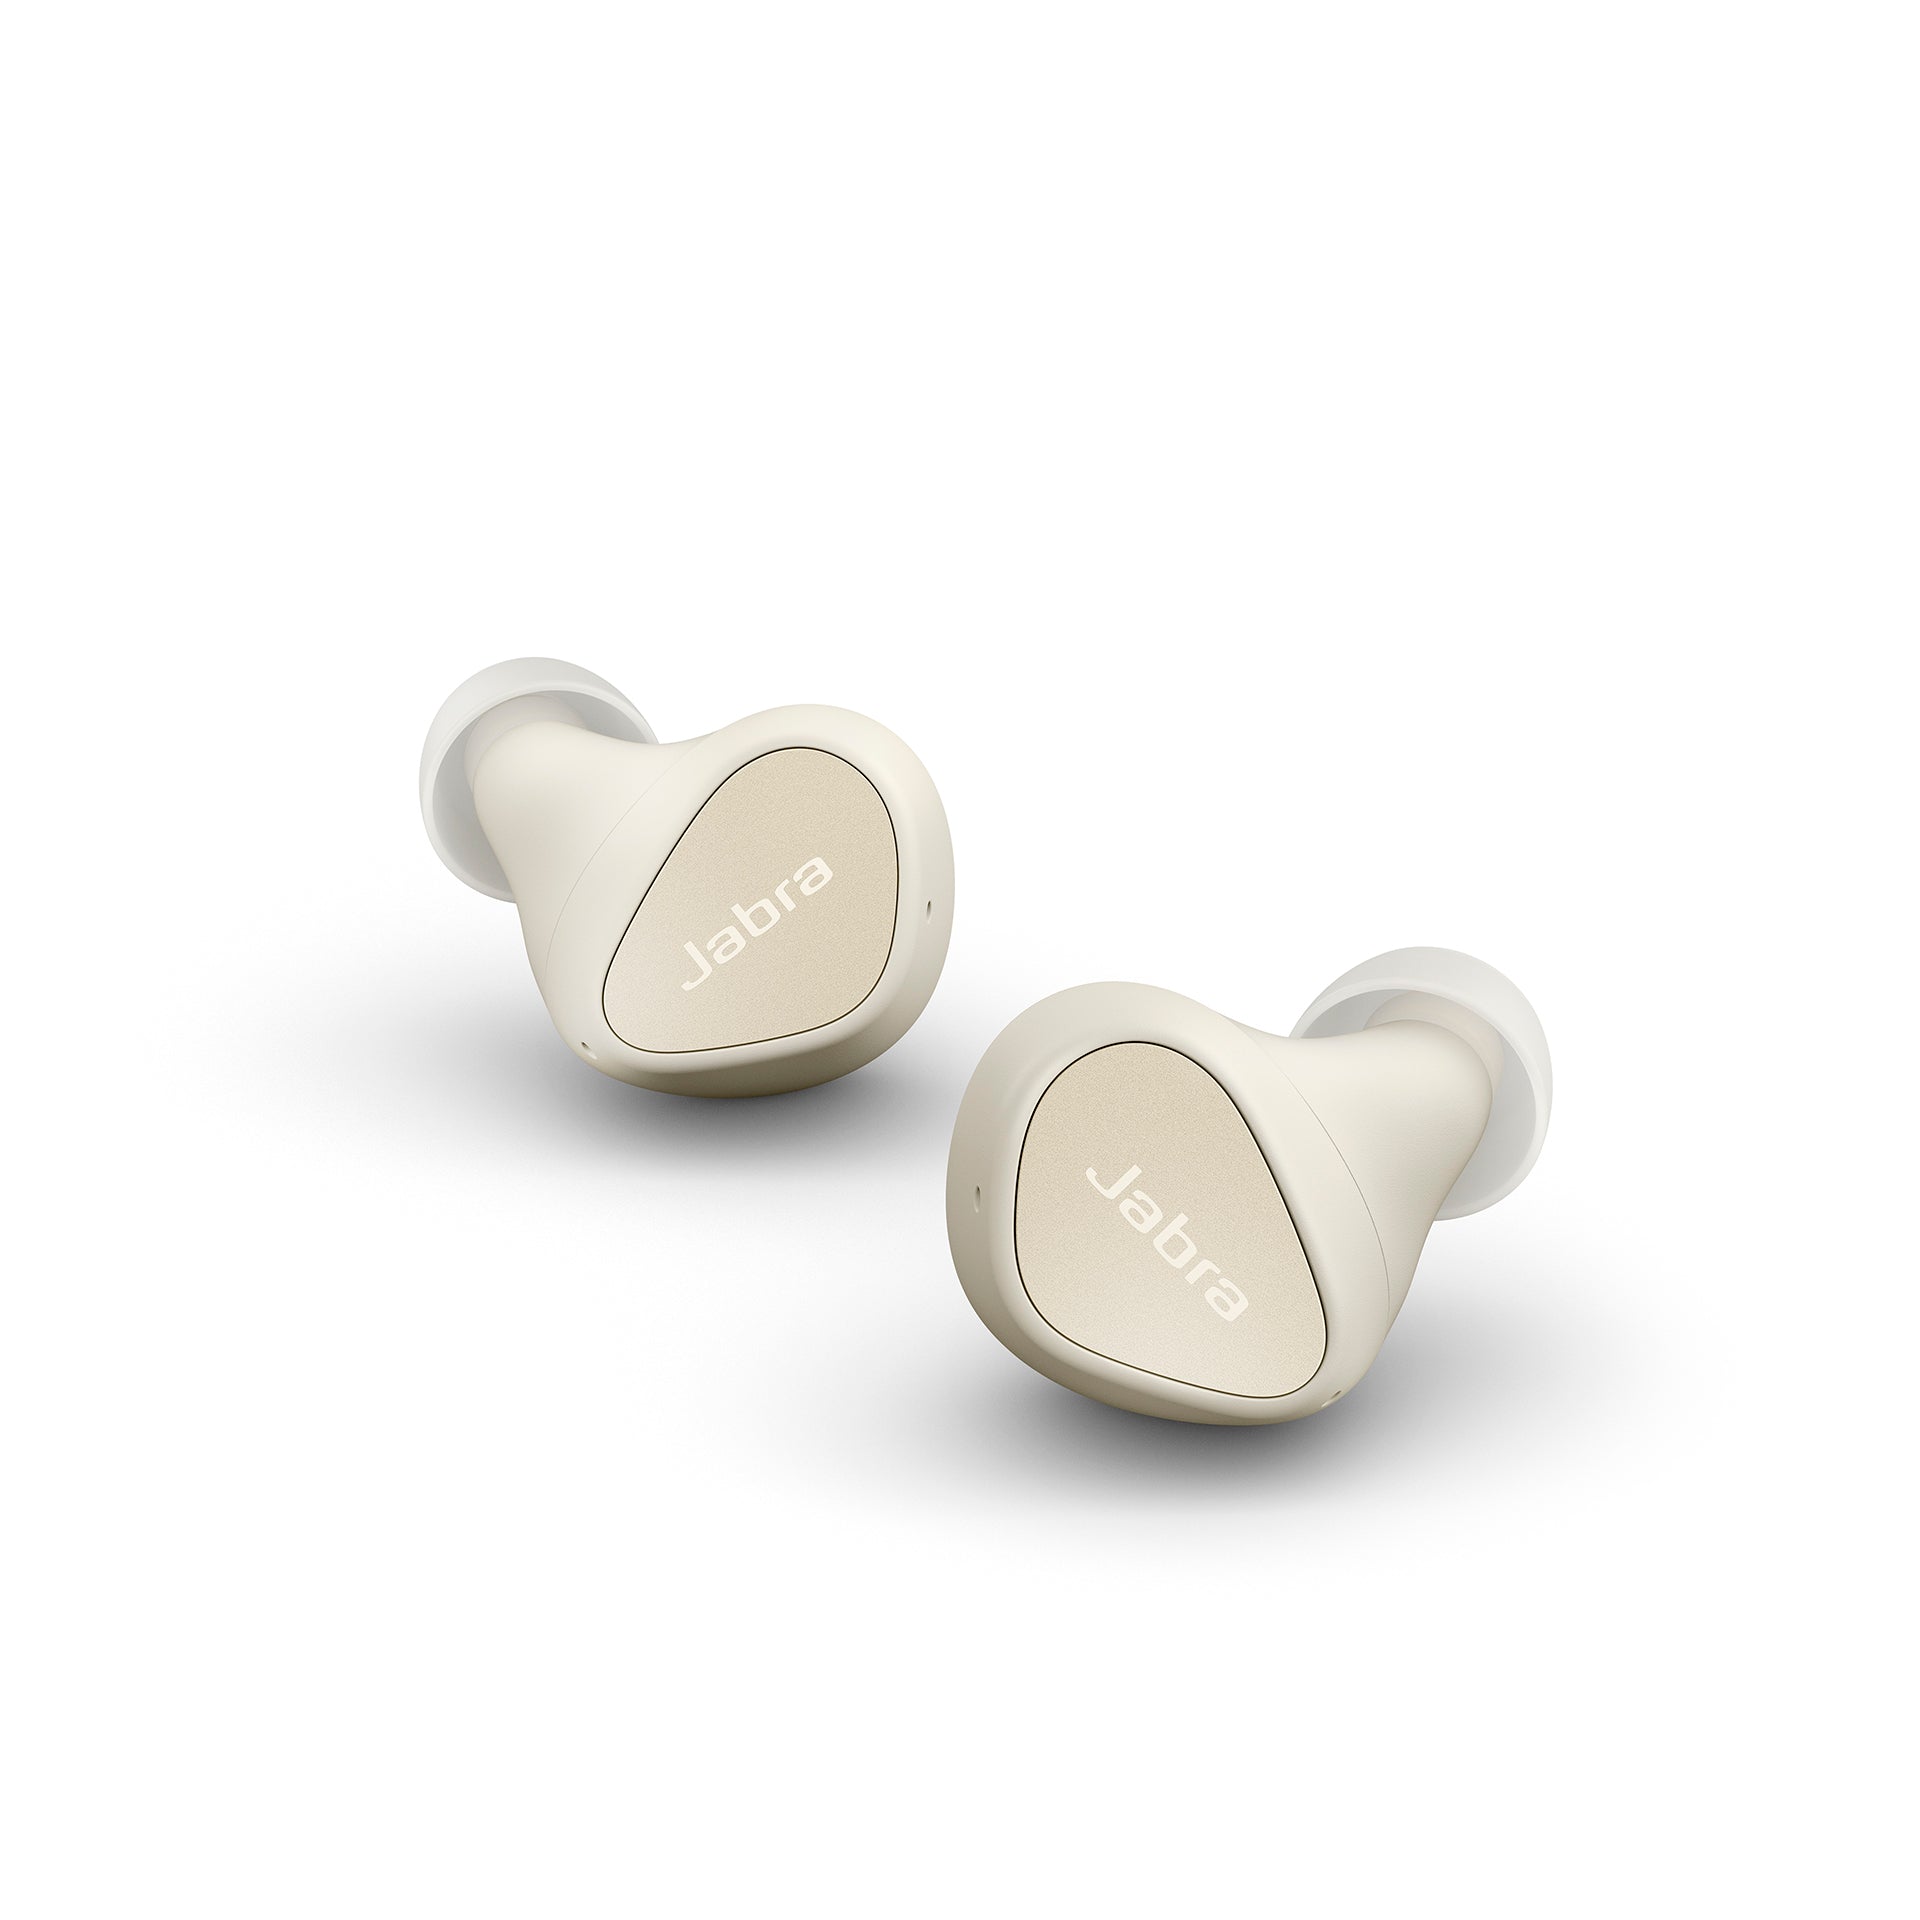 Jabra Elite 3 In Ear Wireless Bluetooth Earbuds – Noise isolating True Wireless buds with 4 built-in Microphones for Clear Calls, Rich Bass, Customizable Sound, and Mono Mode - Light Beige